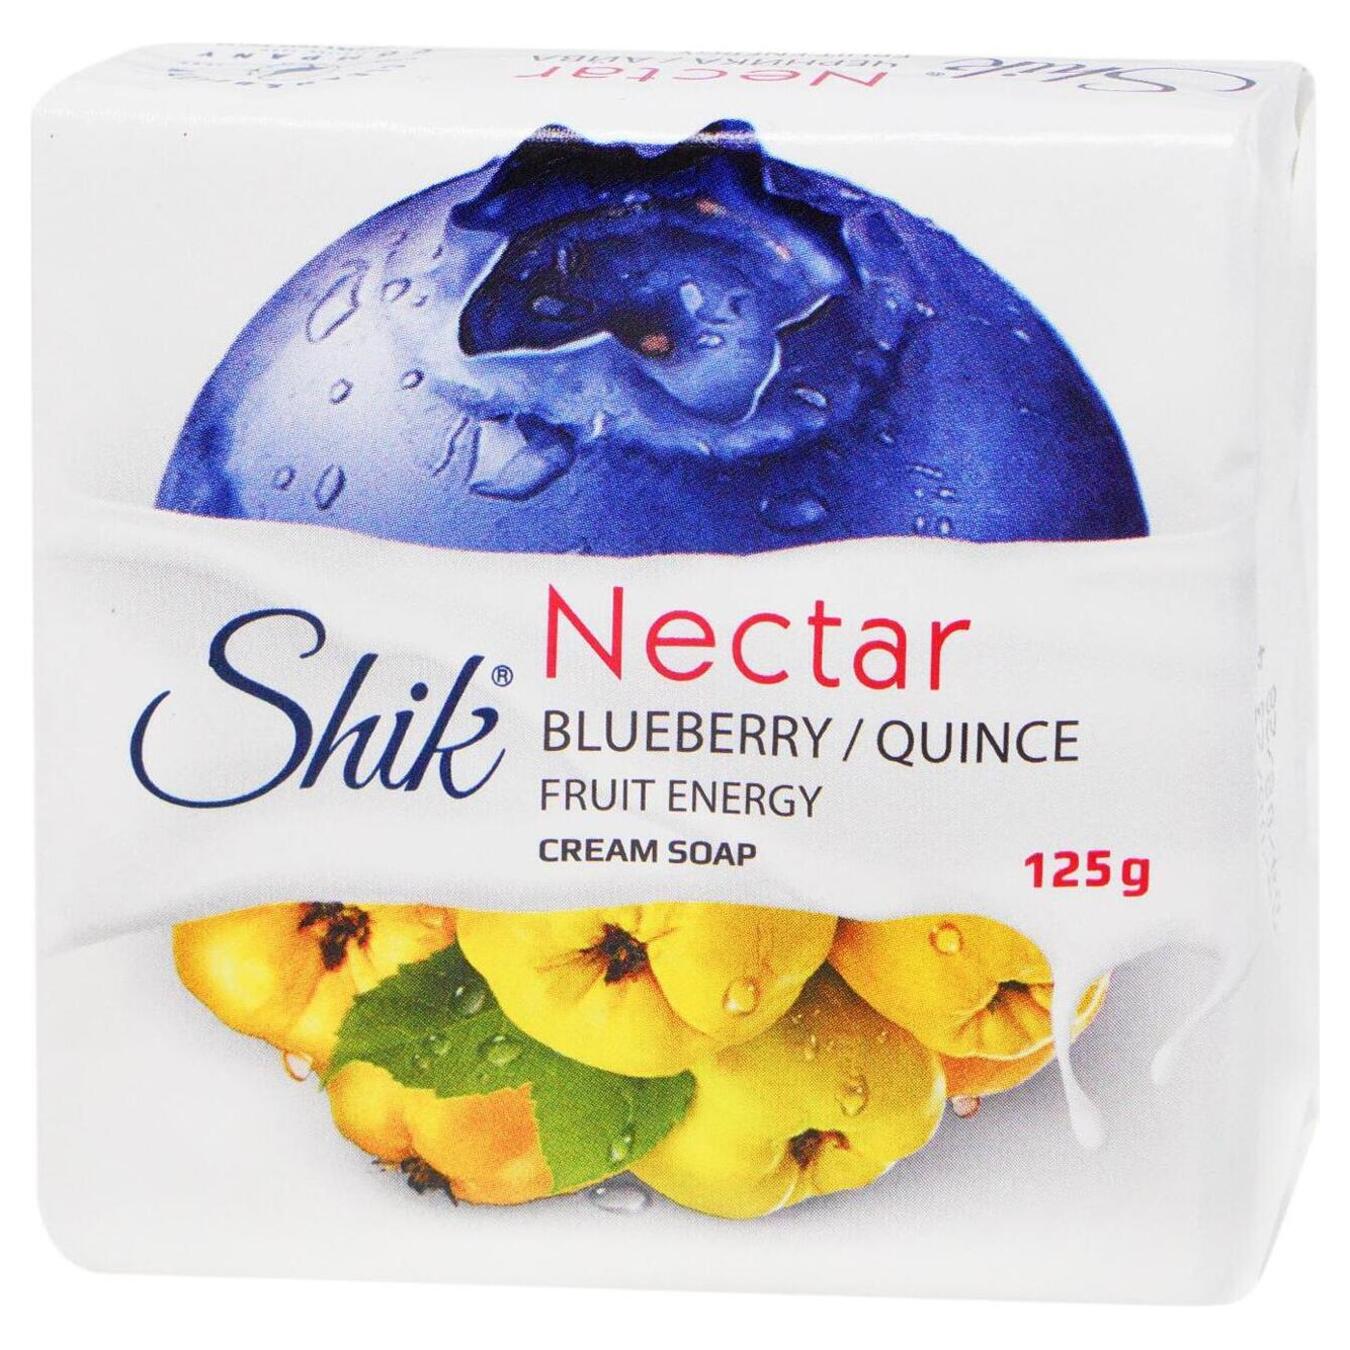 Cream-soap Shik nectar blueberry and quince 125g